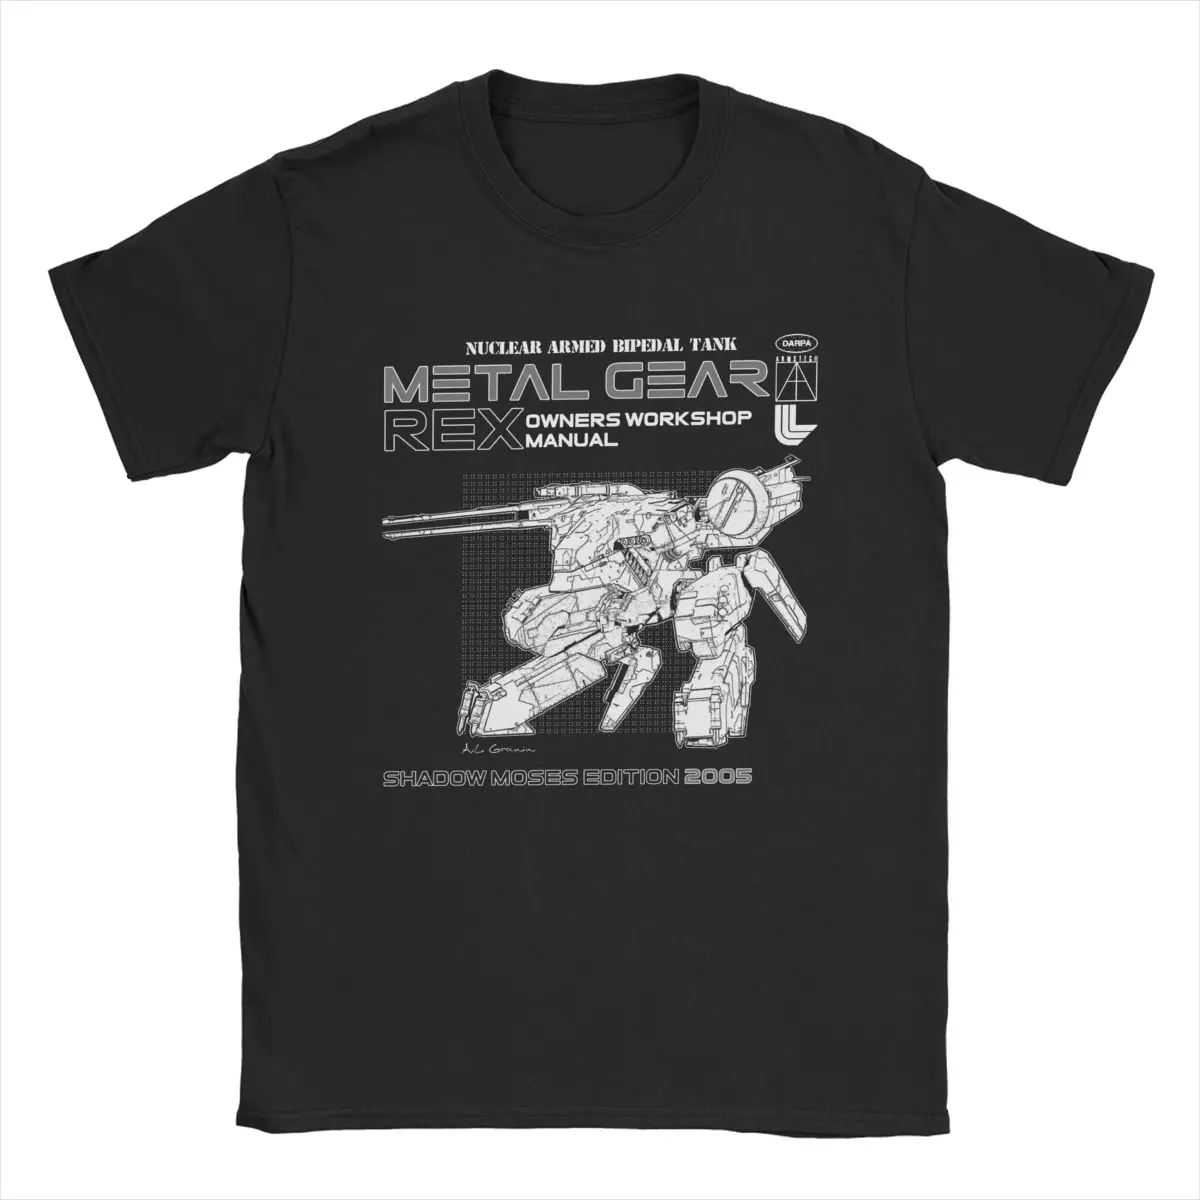 Metal Gear Solid Rex Manual T-Shirts Men Funny 100% Cotton Tee Shirt Round Collar Short Sleeve T Shirt New Arrival Clothes